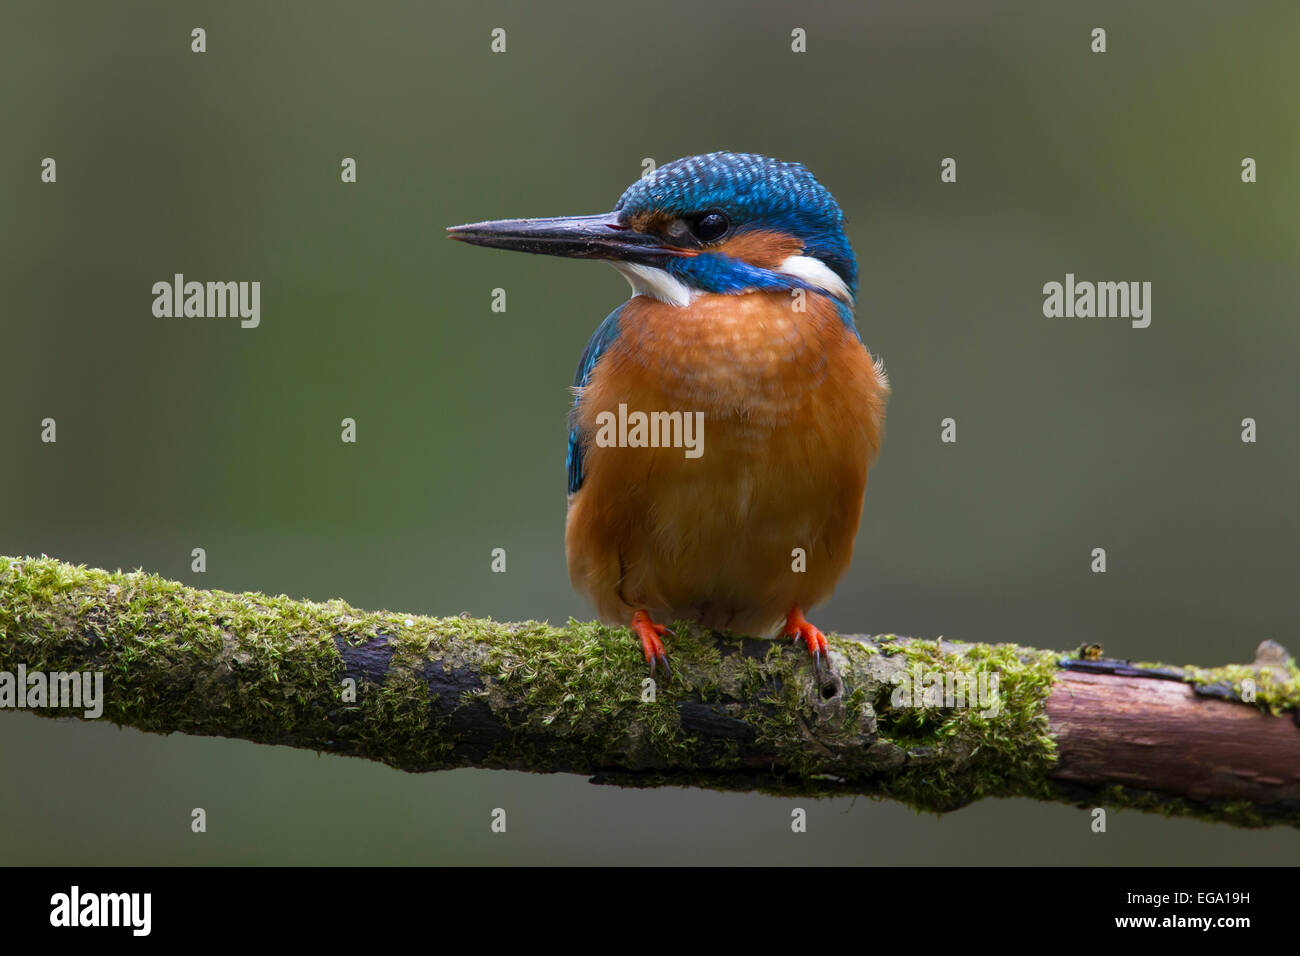 Common kingfisher / Eurasian kingfisher (Alcedo atthis) male perched on branch and on the lookout for fish in river Stock Photo